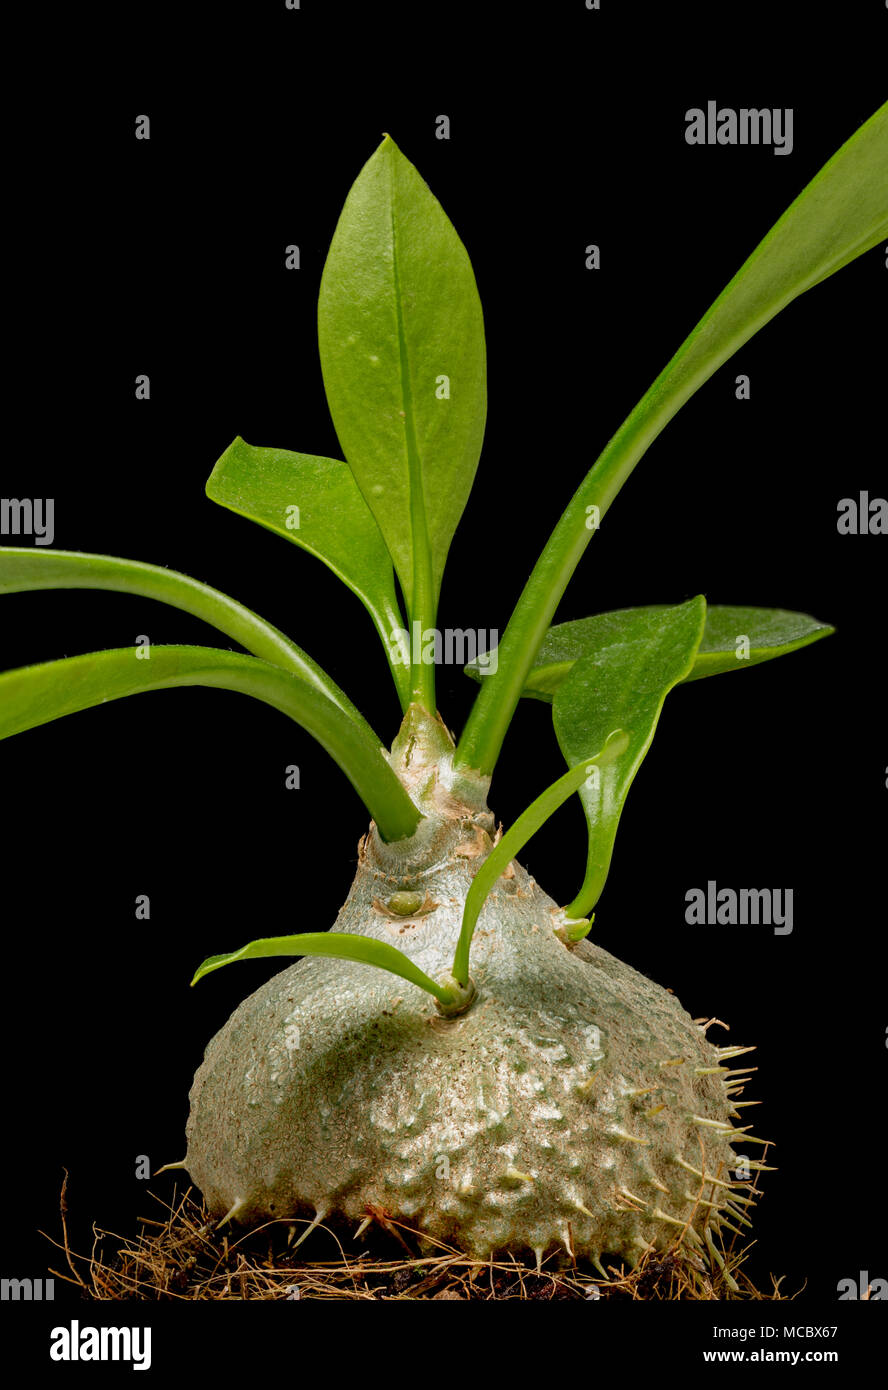 Australian Ant Plant, Myrmecodia beccarii, an epiphytic plant that has a symbiotic relationship with ants, which live in the bulbous caudex. Stock Photo